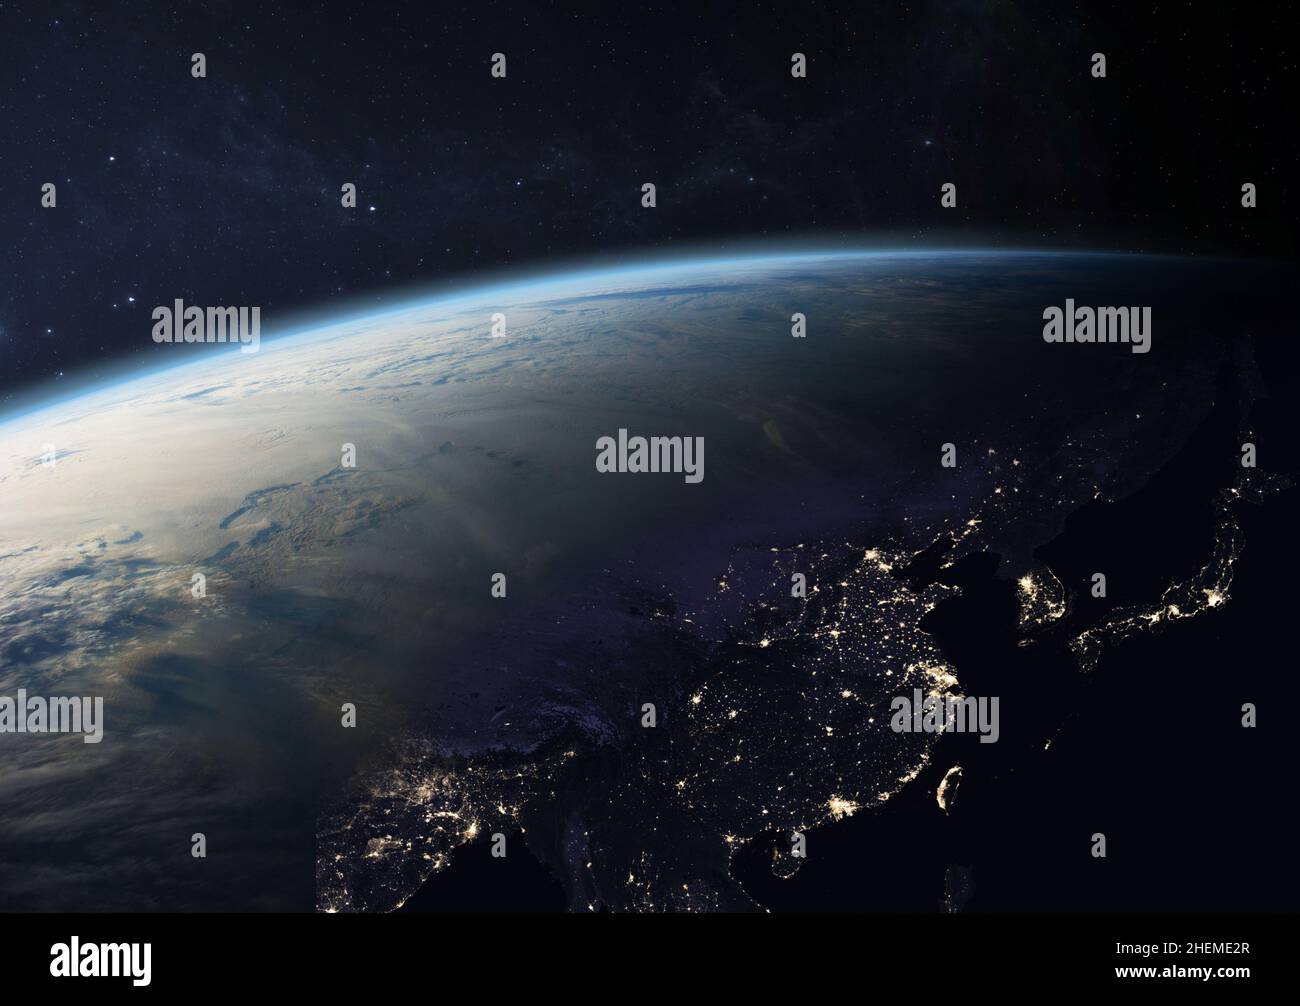 Planet Earth from the space at night. Asia at night: China, Taiwan, India, Japan, Laos and other countries. Elements of this image furnished by NASA. Stock Photo